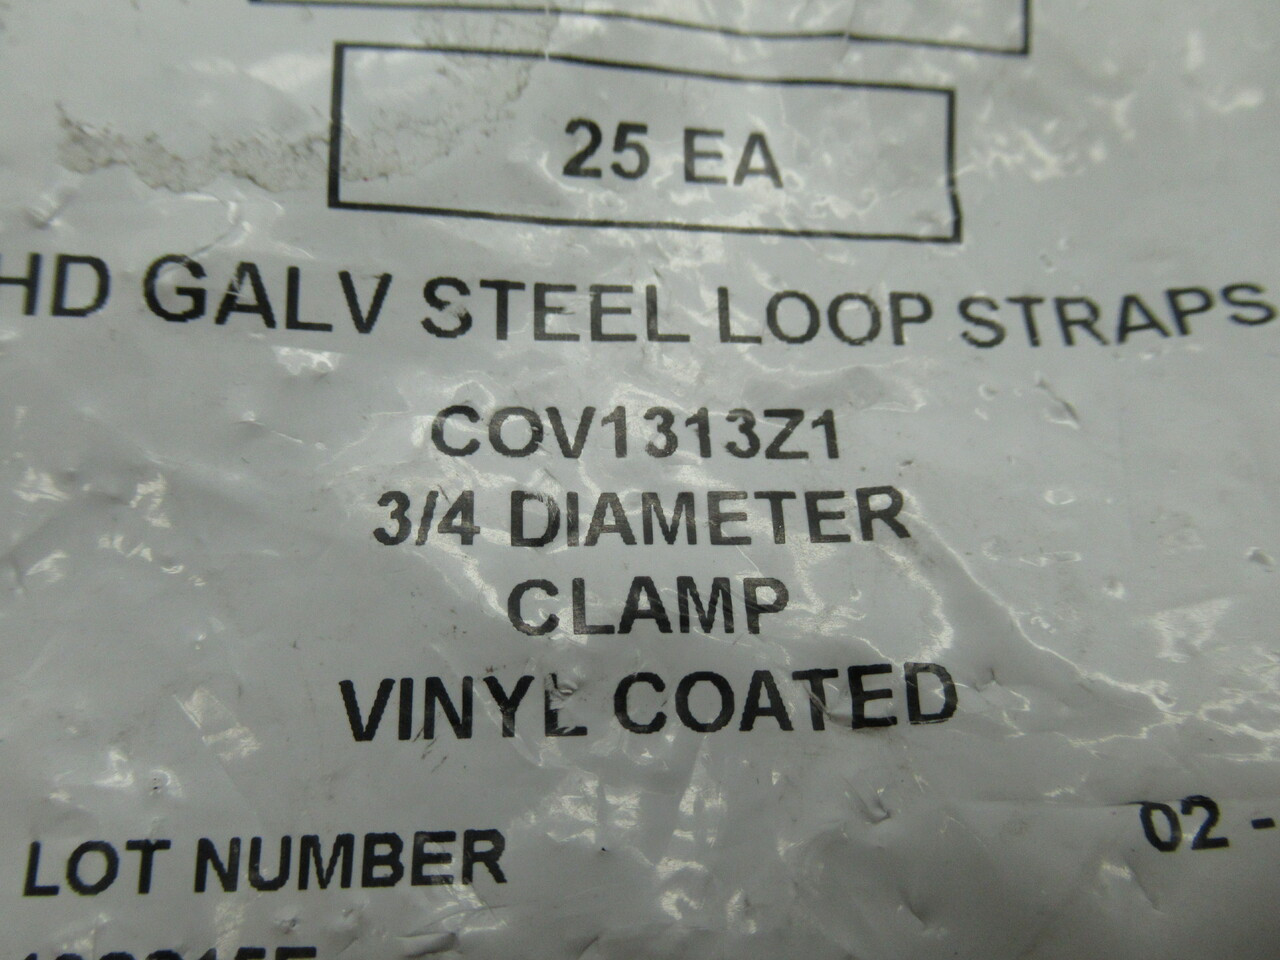 McMaster Carr COV1313Z1 Galv. Steel Loop Strap 3/4" *17-PACK* *RIPPED BAG* NWB